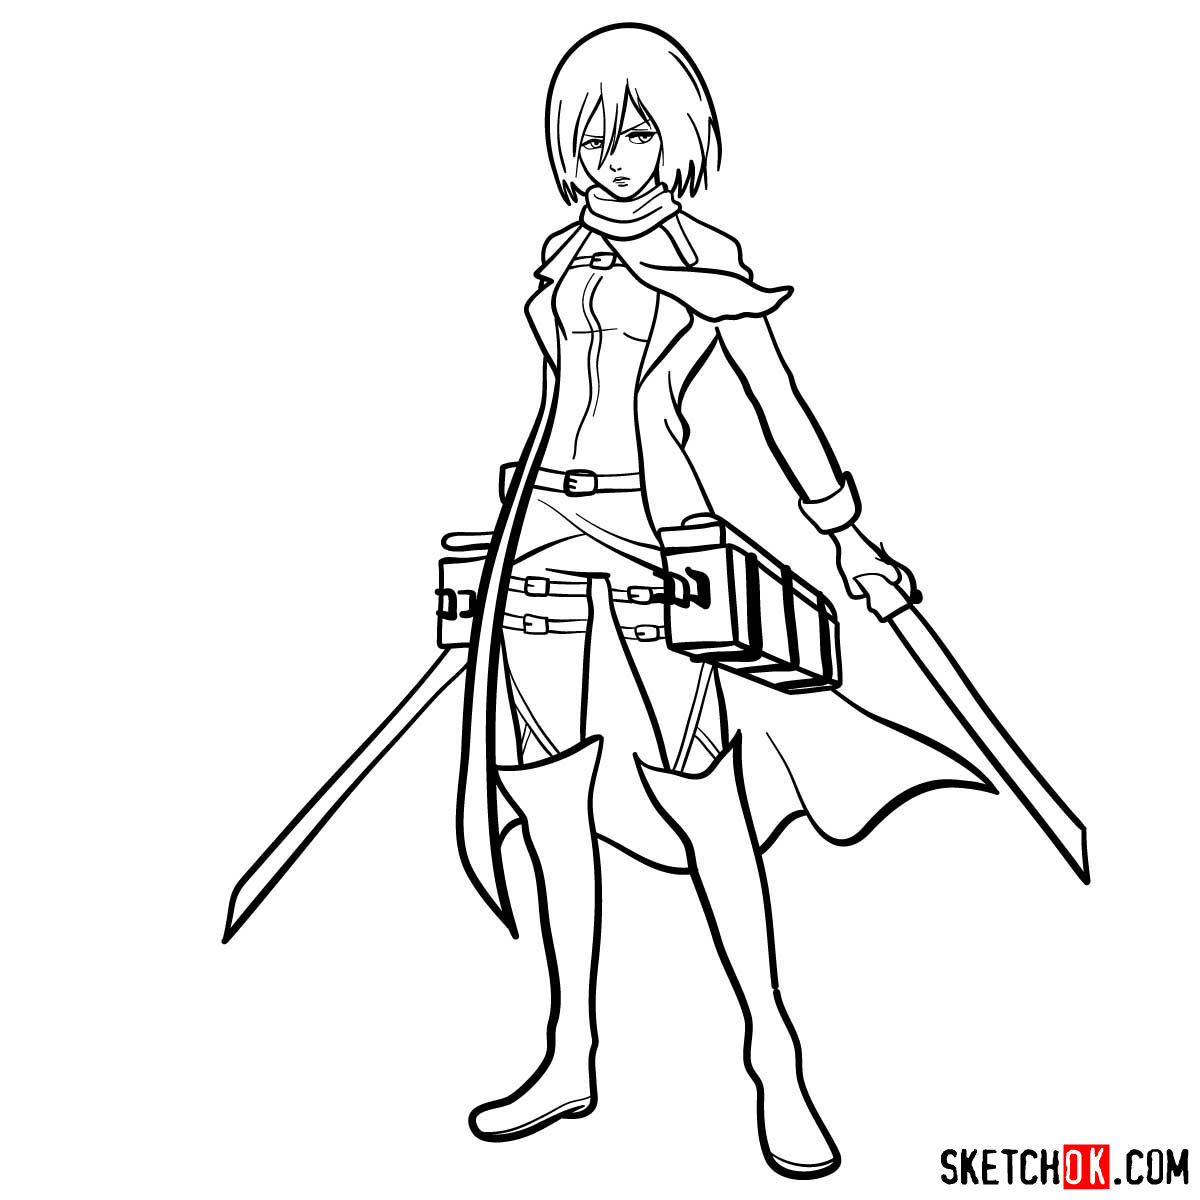 How to draw Mikasa Ackerman with her weapons